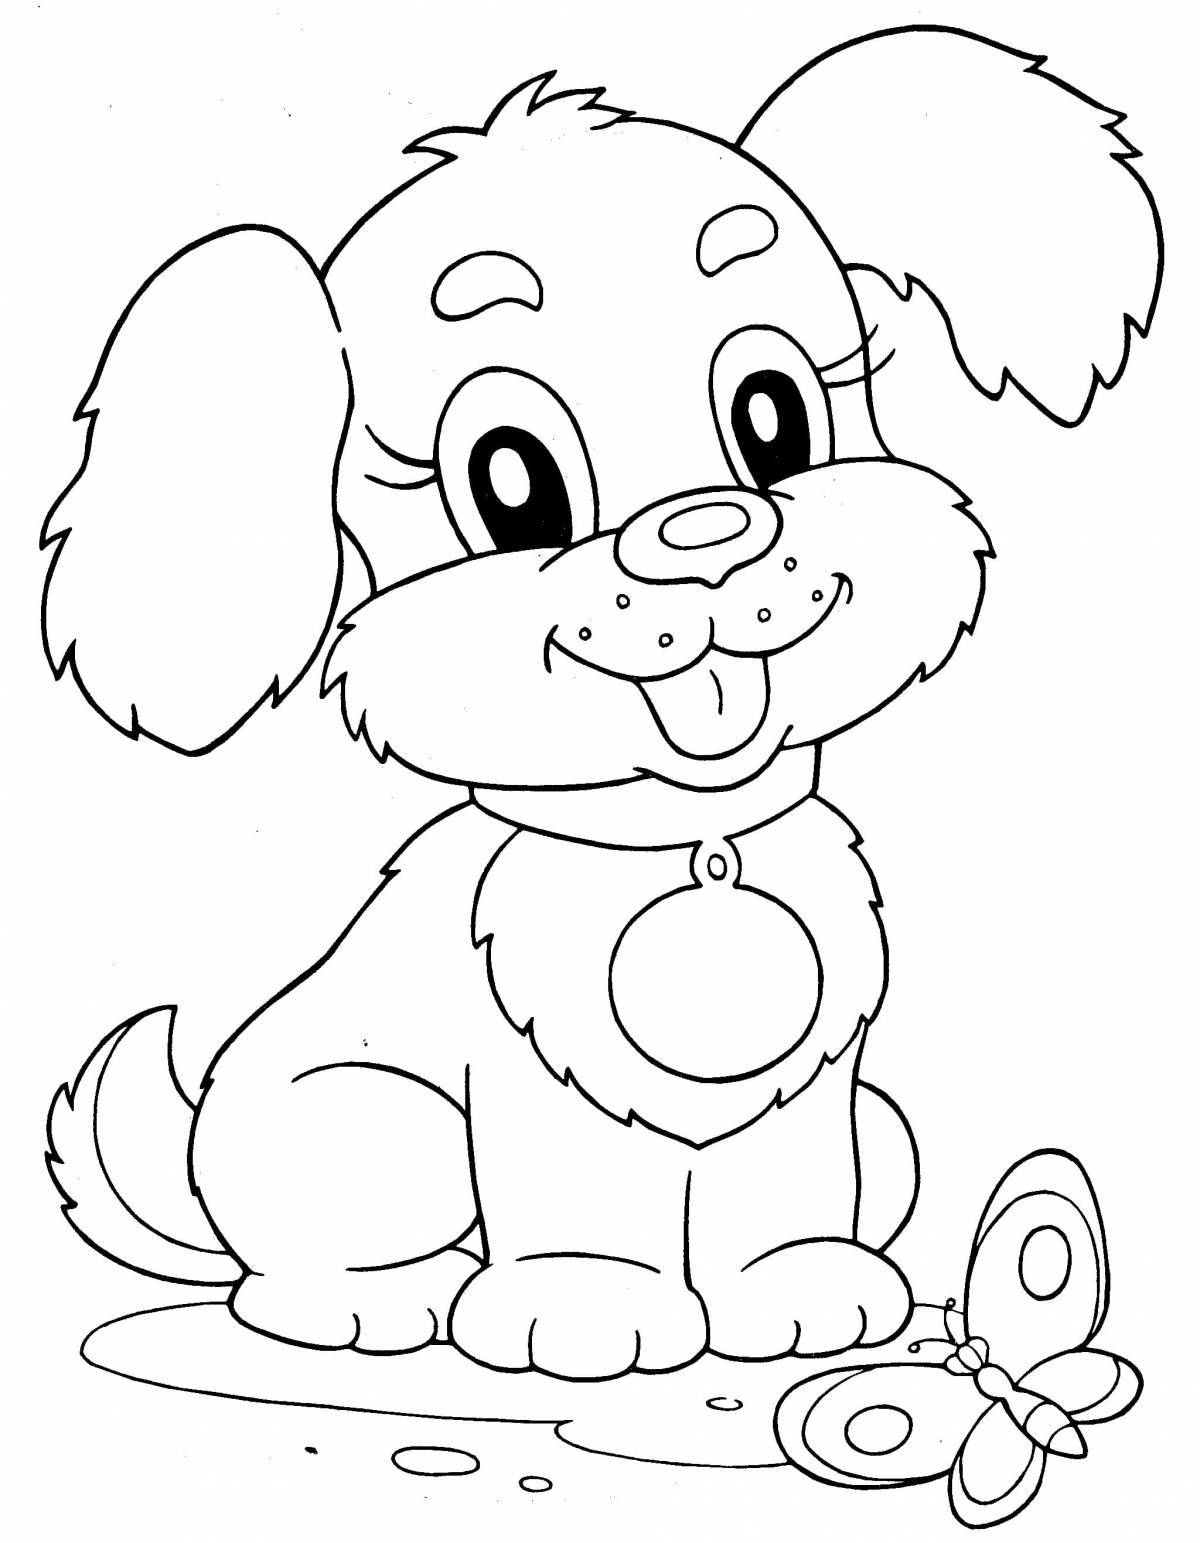 Amazing animal coloring pages for 4-5 year olds